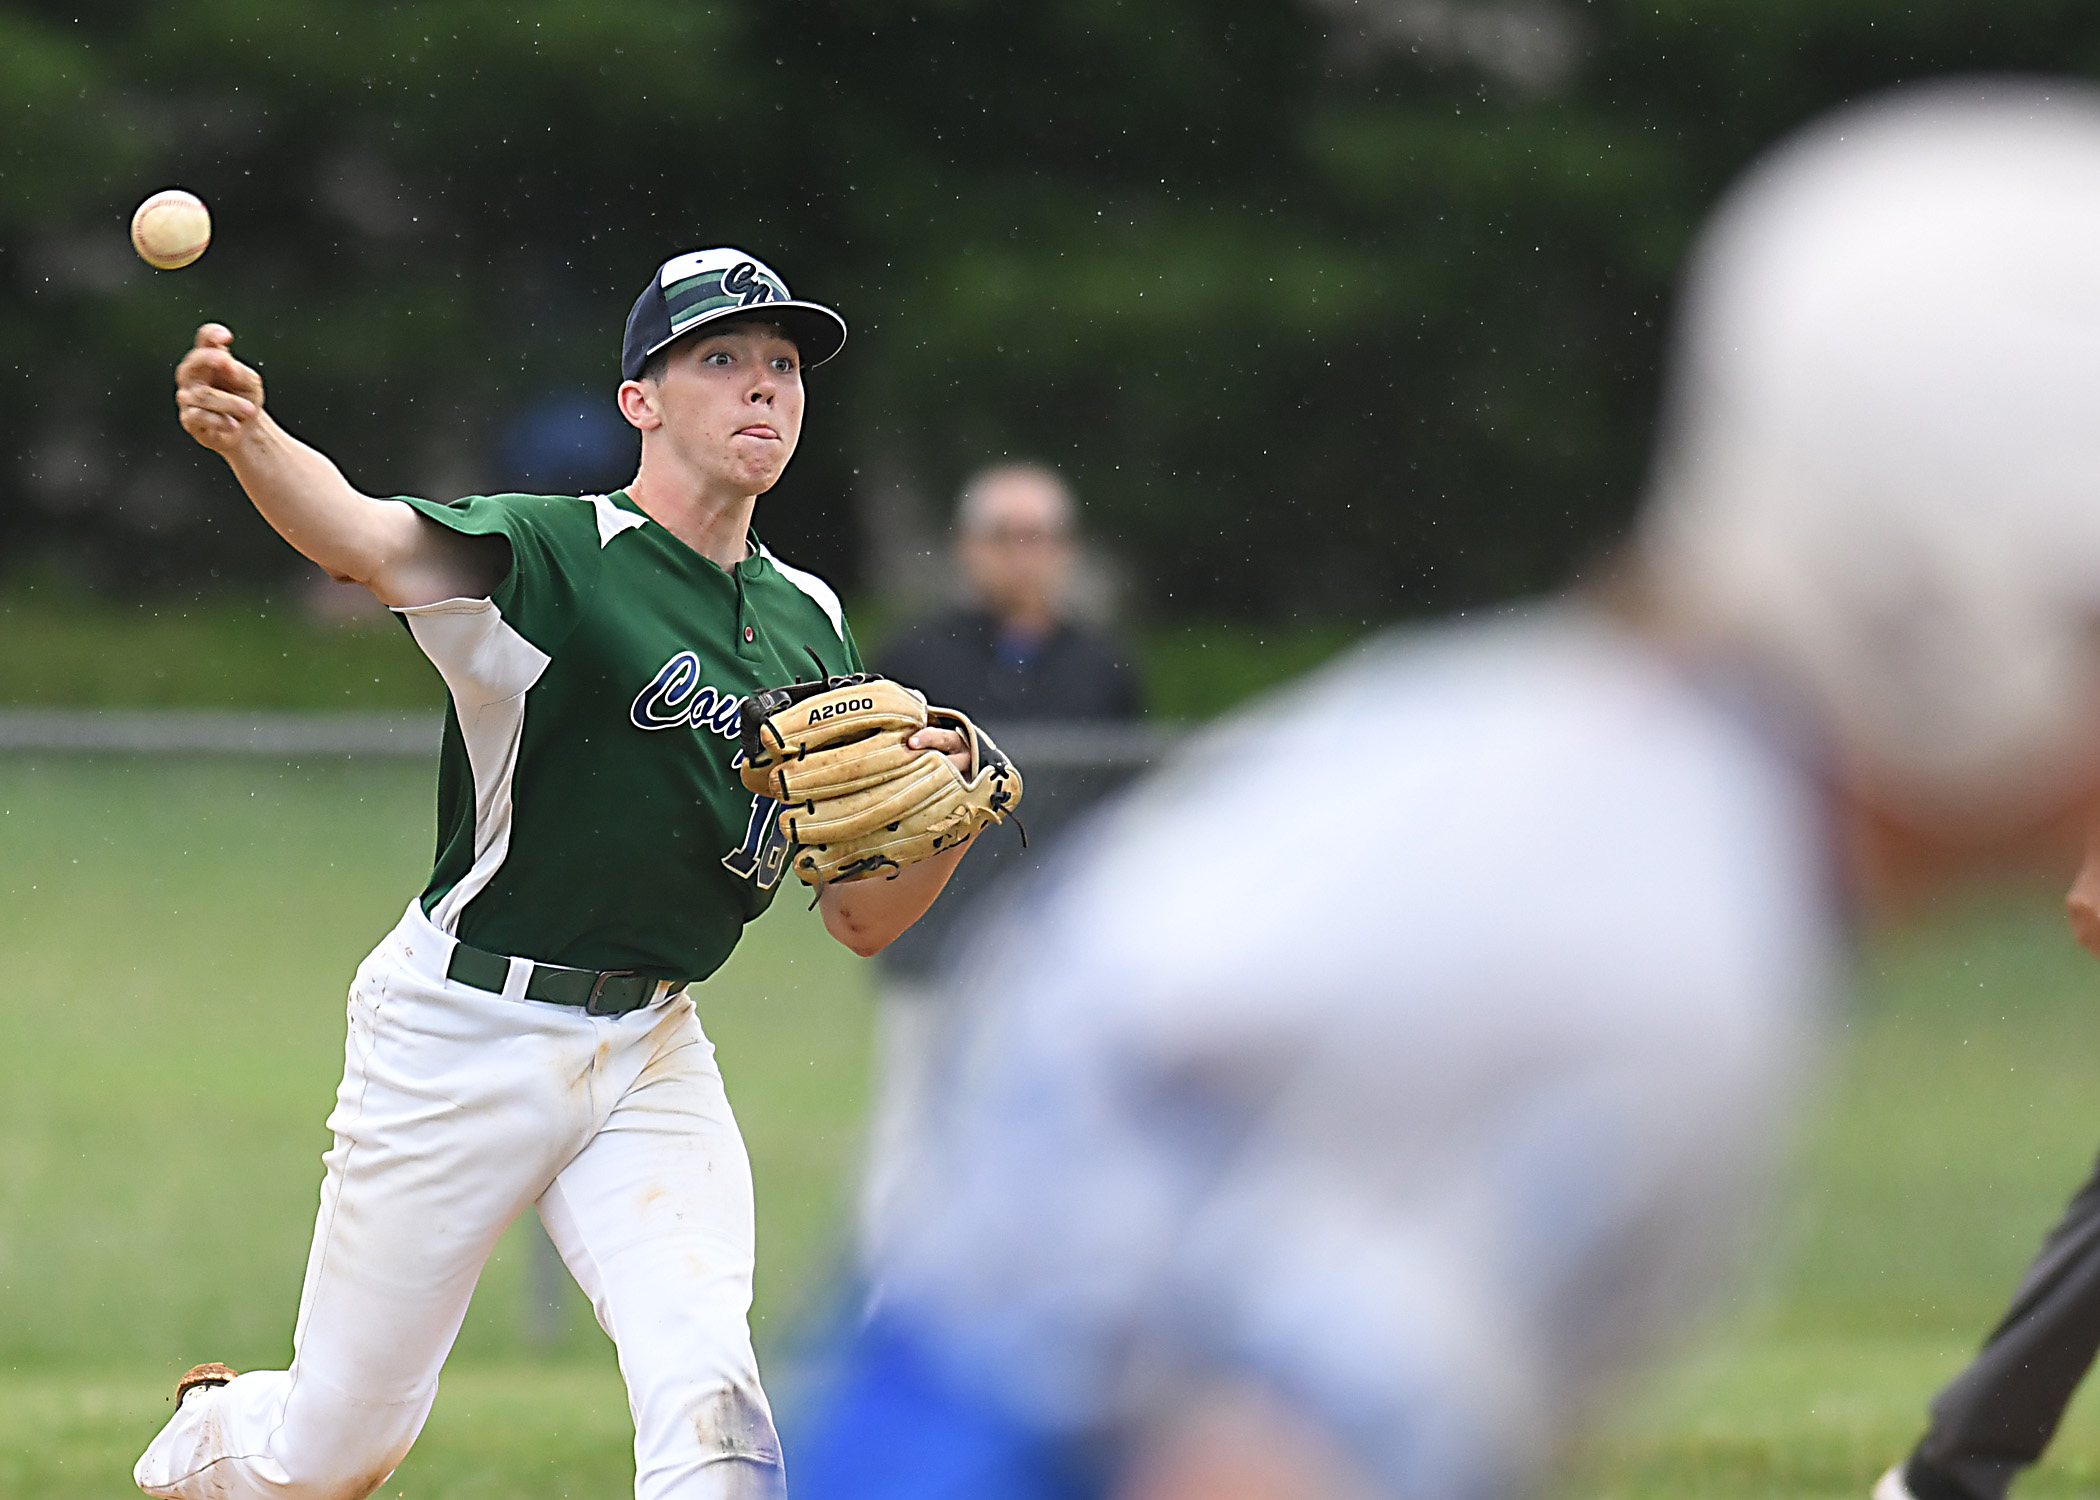 Baseball – Jersey Mike's Team of the Week: Colts Neck